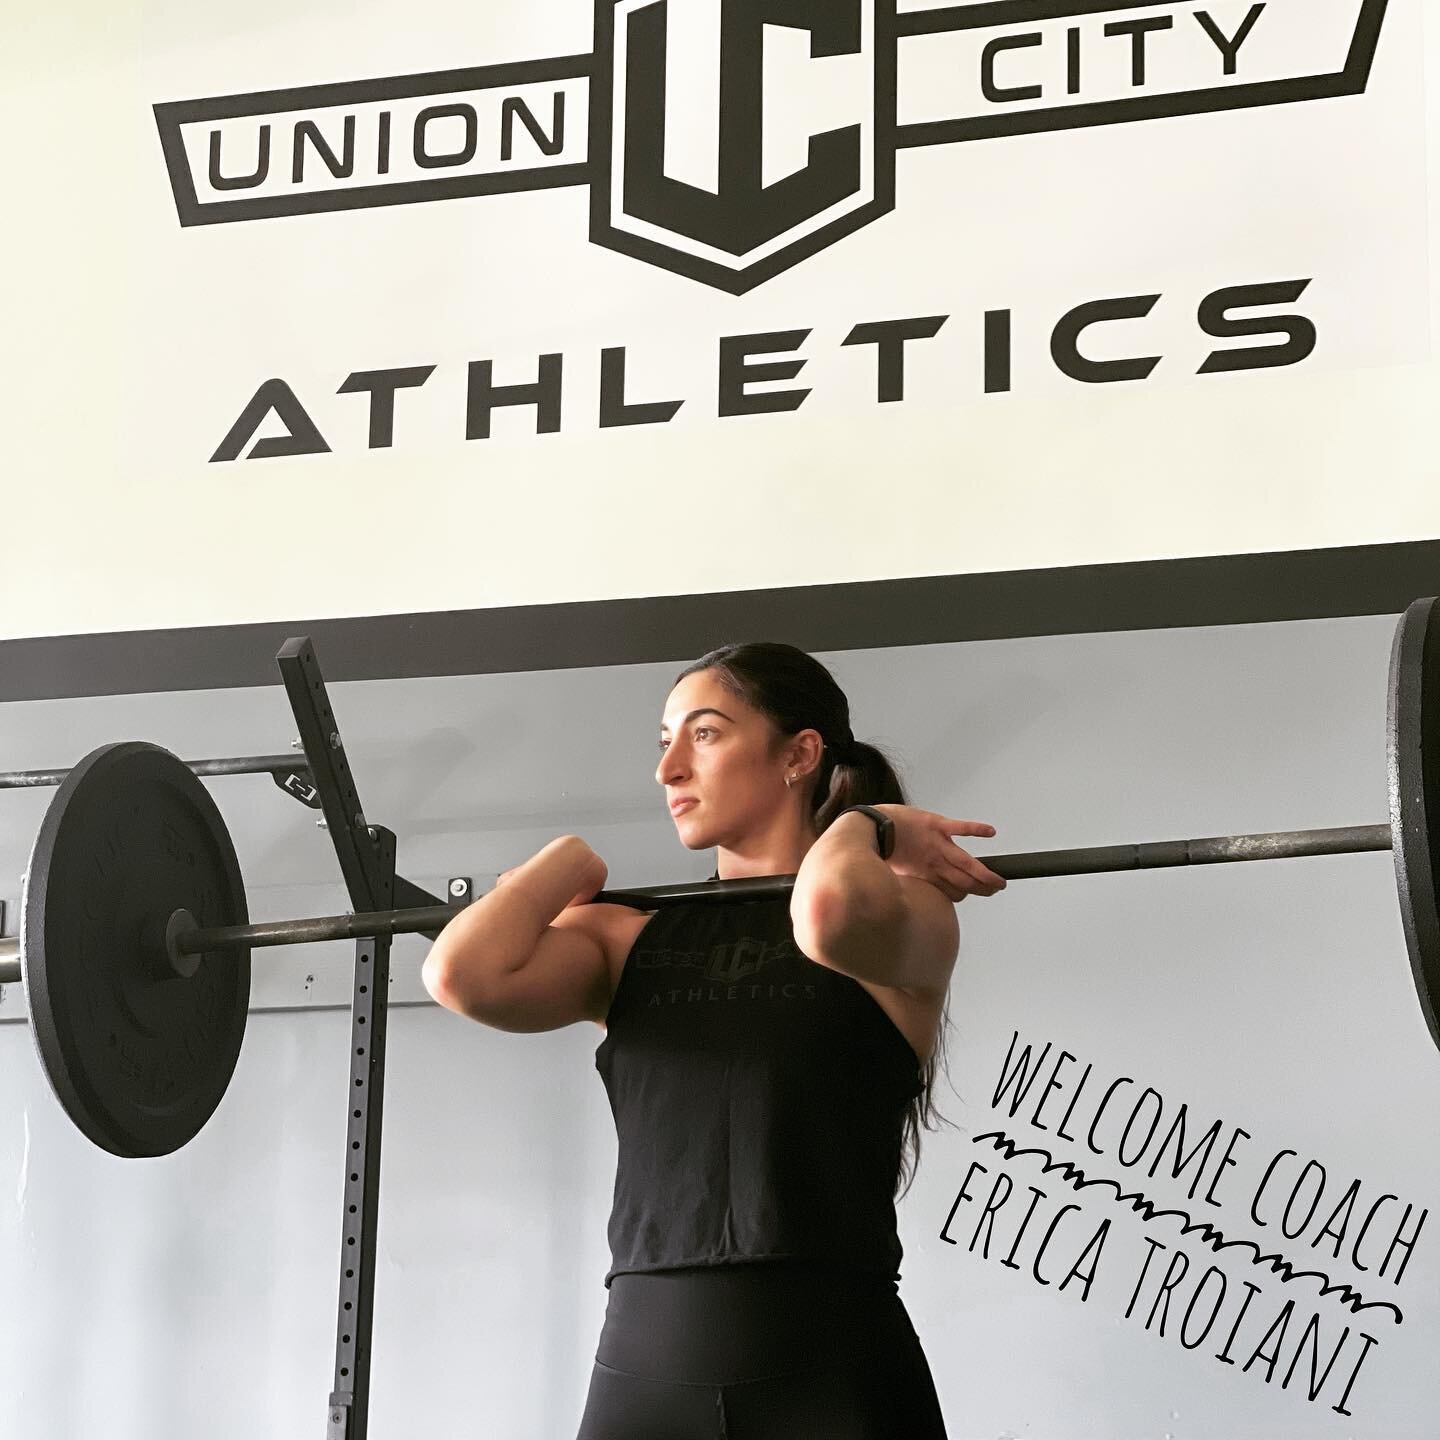 We&rsquo;re delighted to announce that  Erica Troiani has joined Union City Athletics coaching staff! 

Erica is from Prospect, born and raised. She is super passionate about fitness and is looking to further educate herself and grow in the fitness i